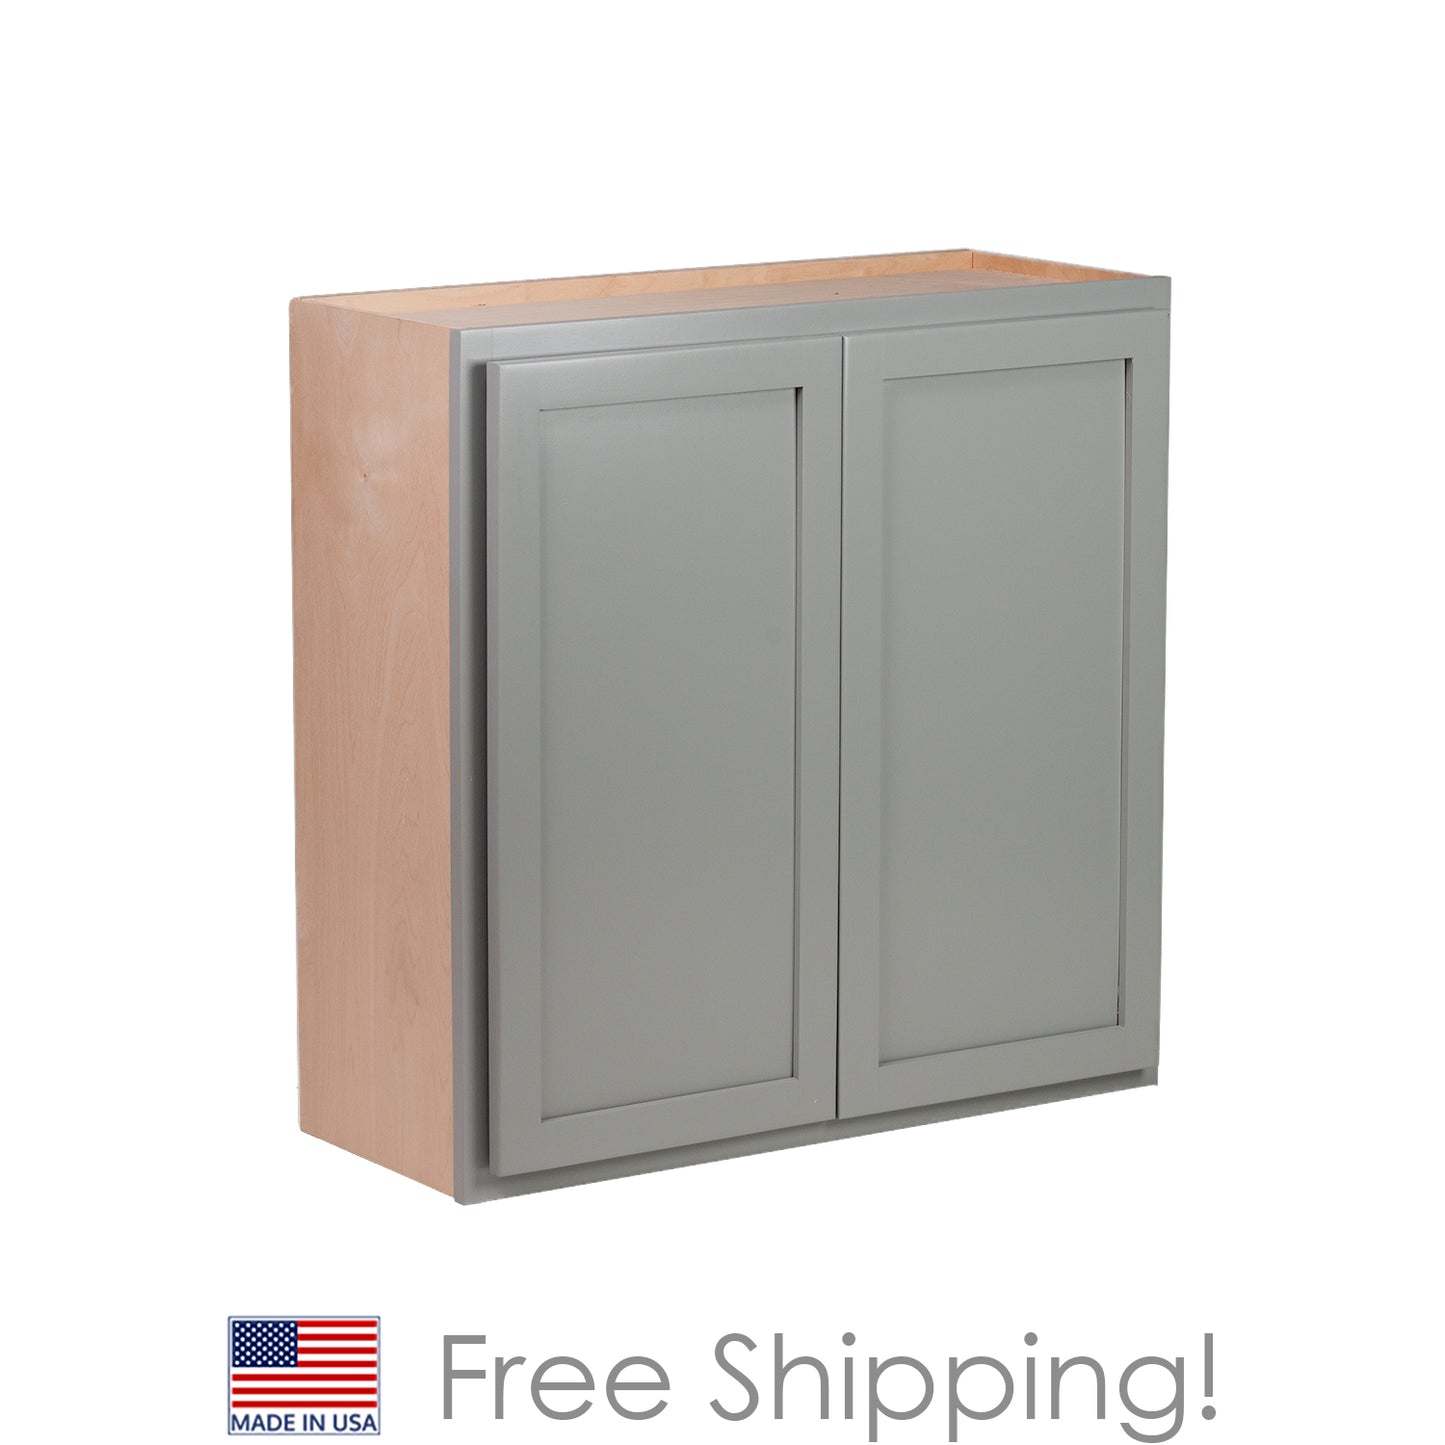 Quicklock RTA (Ready-to-Assemble) Magnetic Gray Wall Cabinet- Double Door 30"H x (30", 36"W)